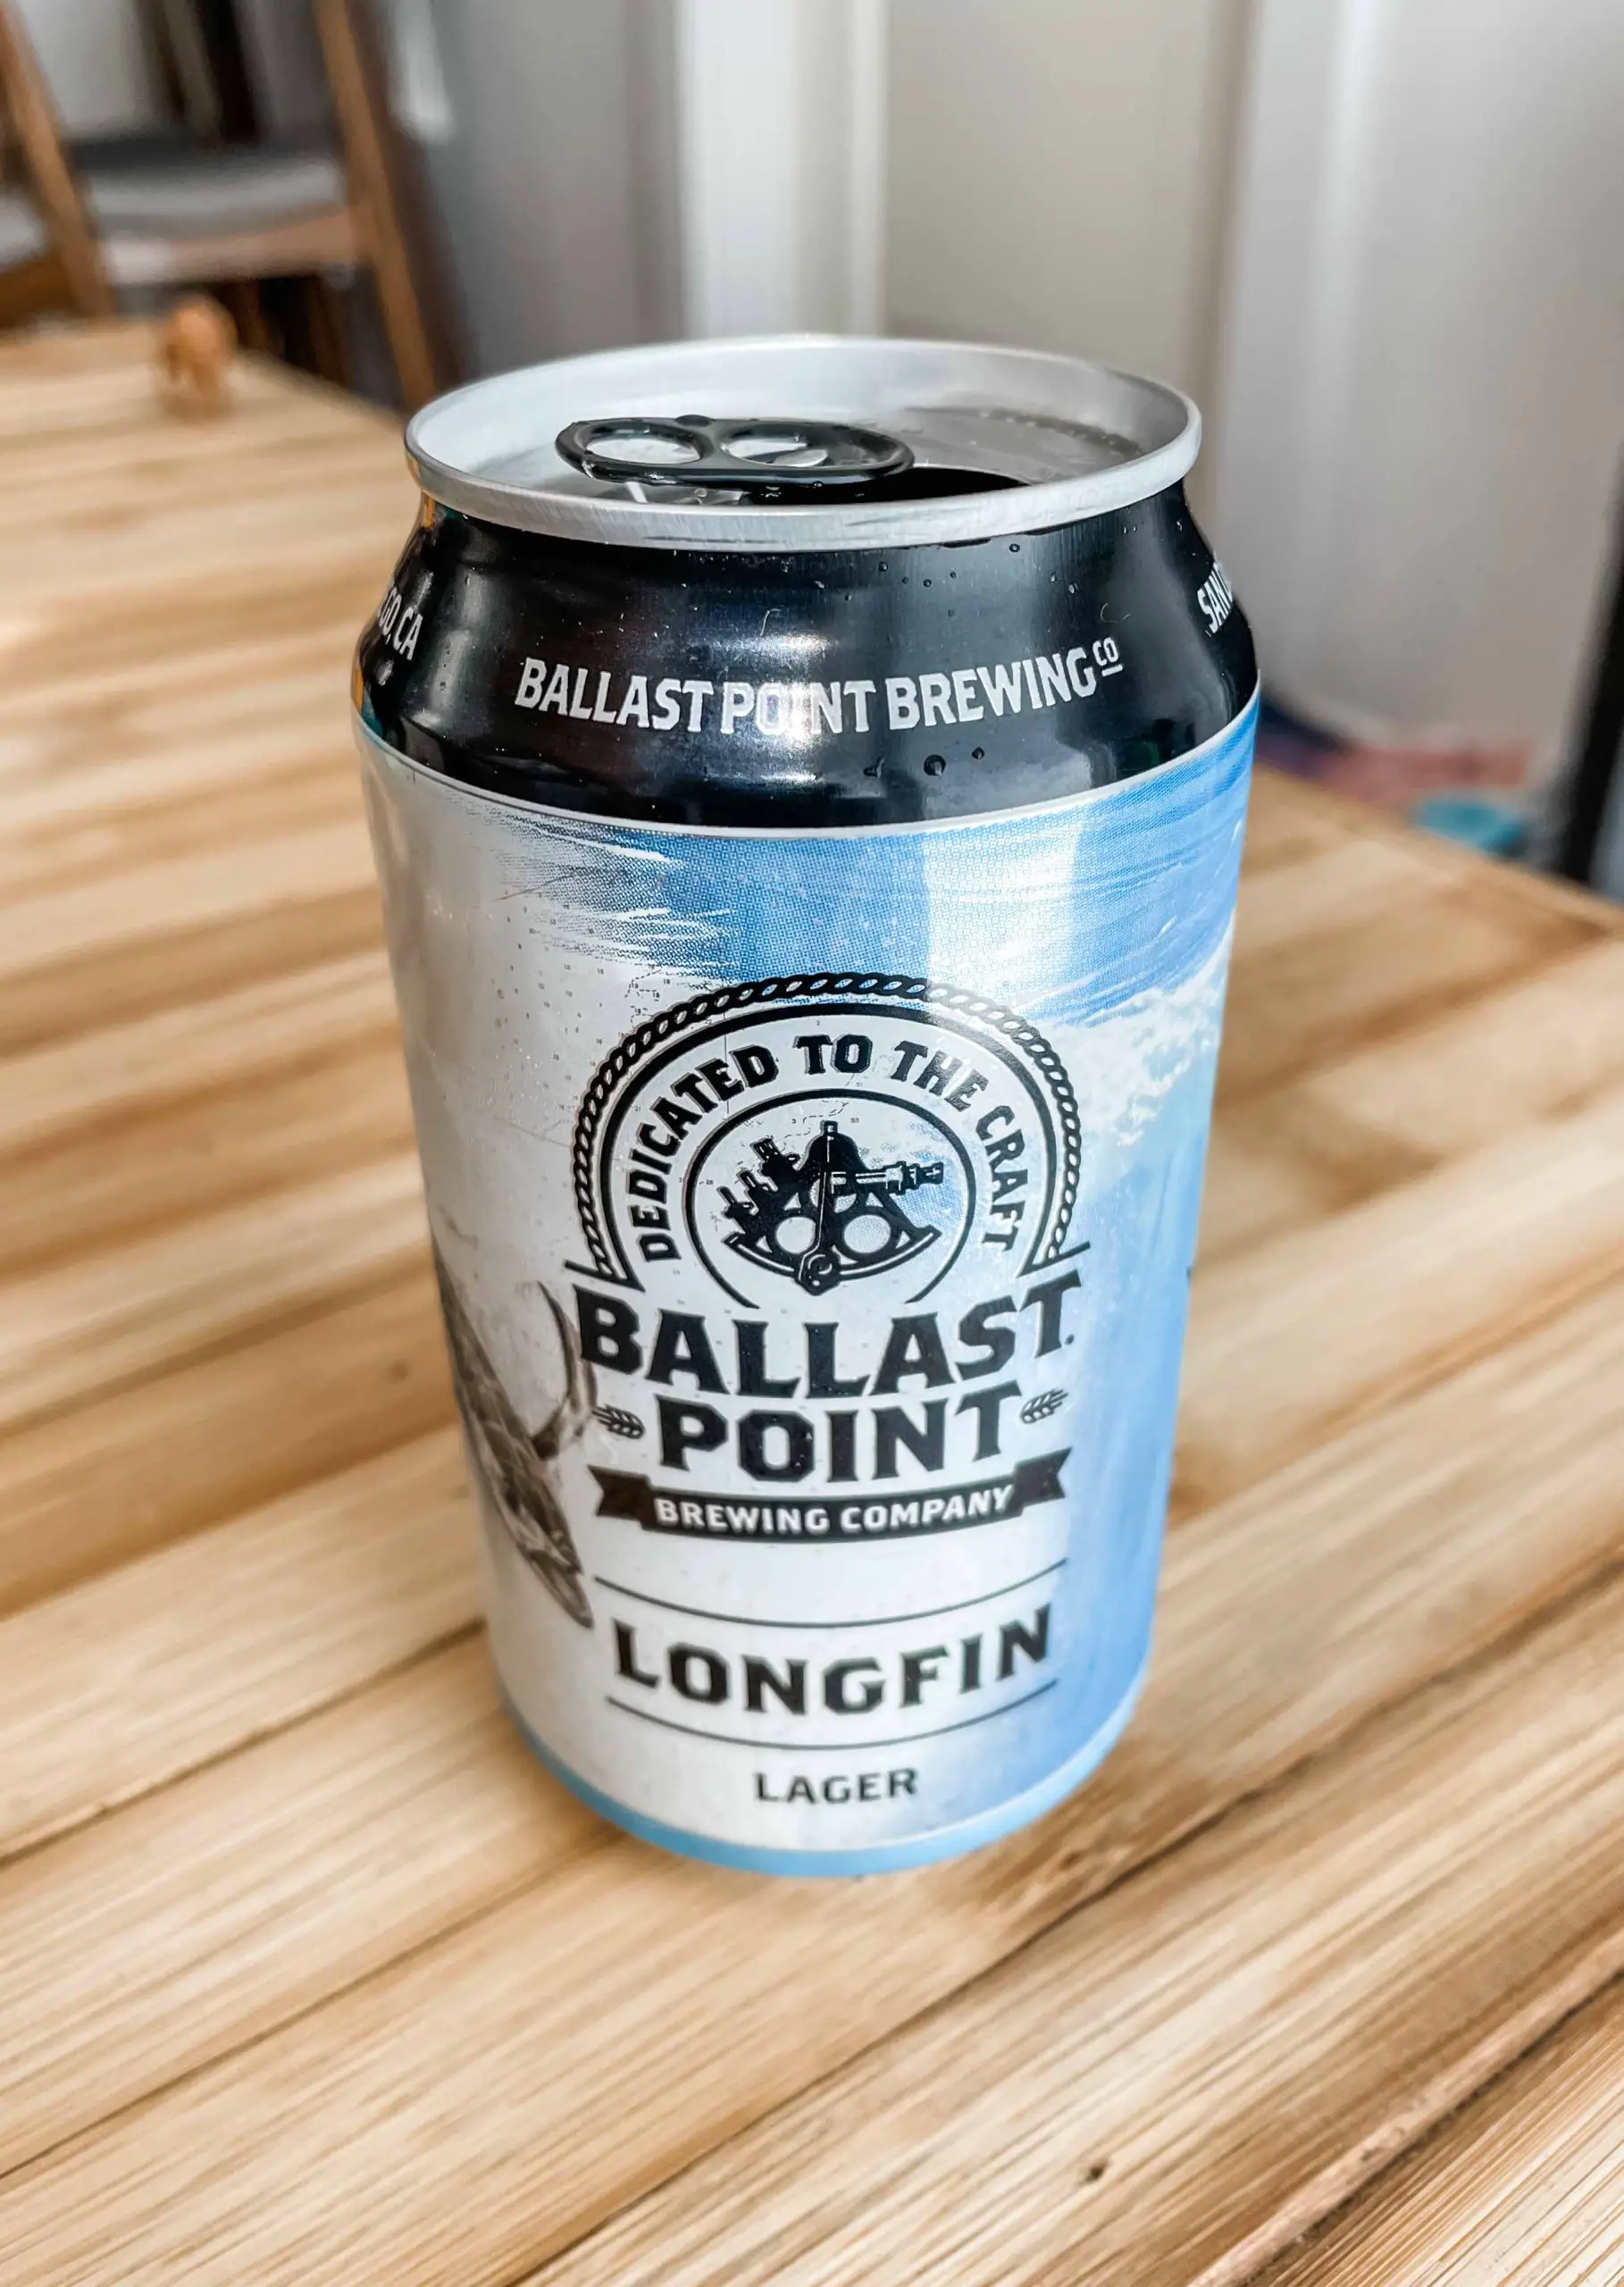 craft beer san diego ballast point brewing company longfin lager